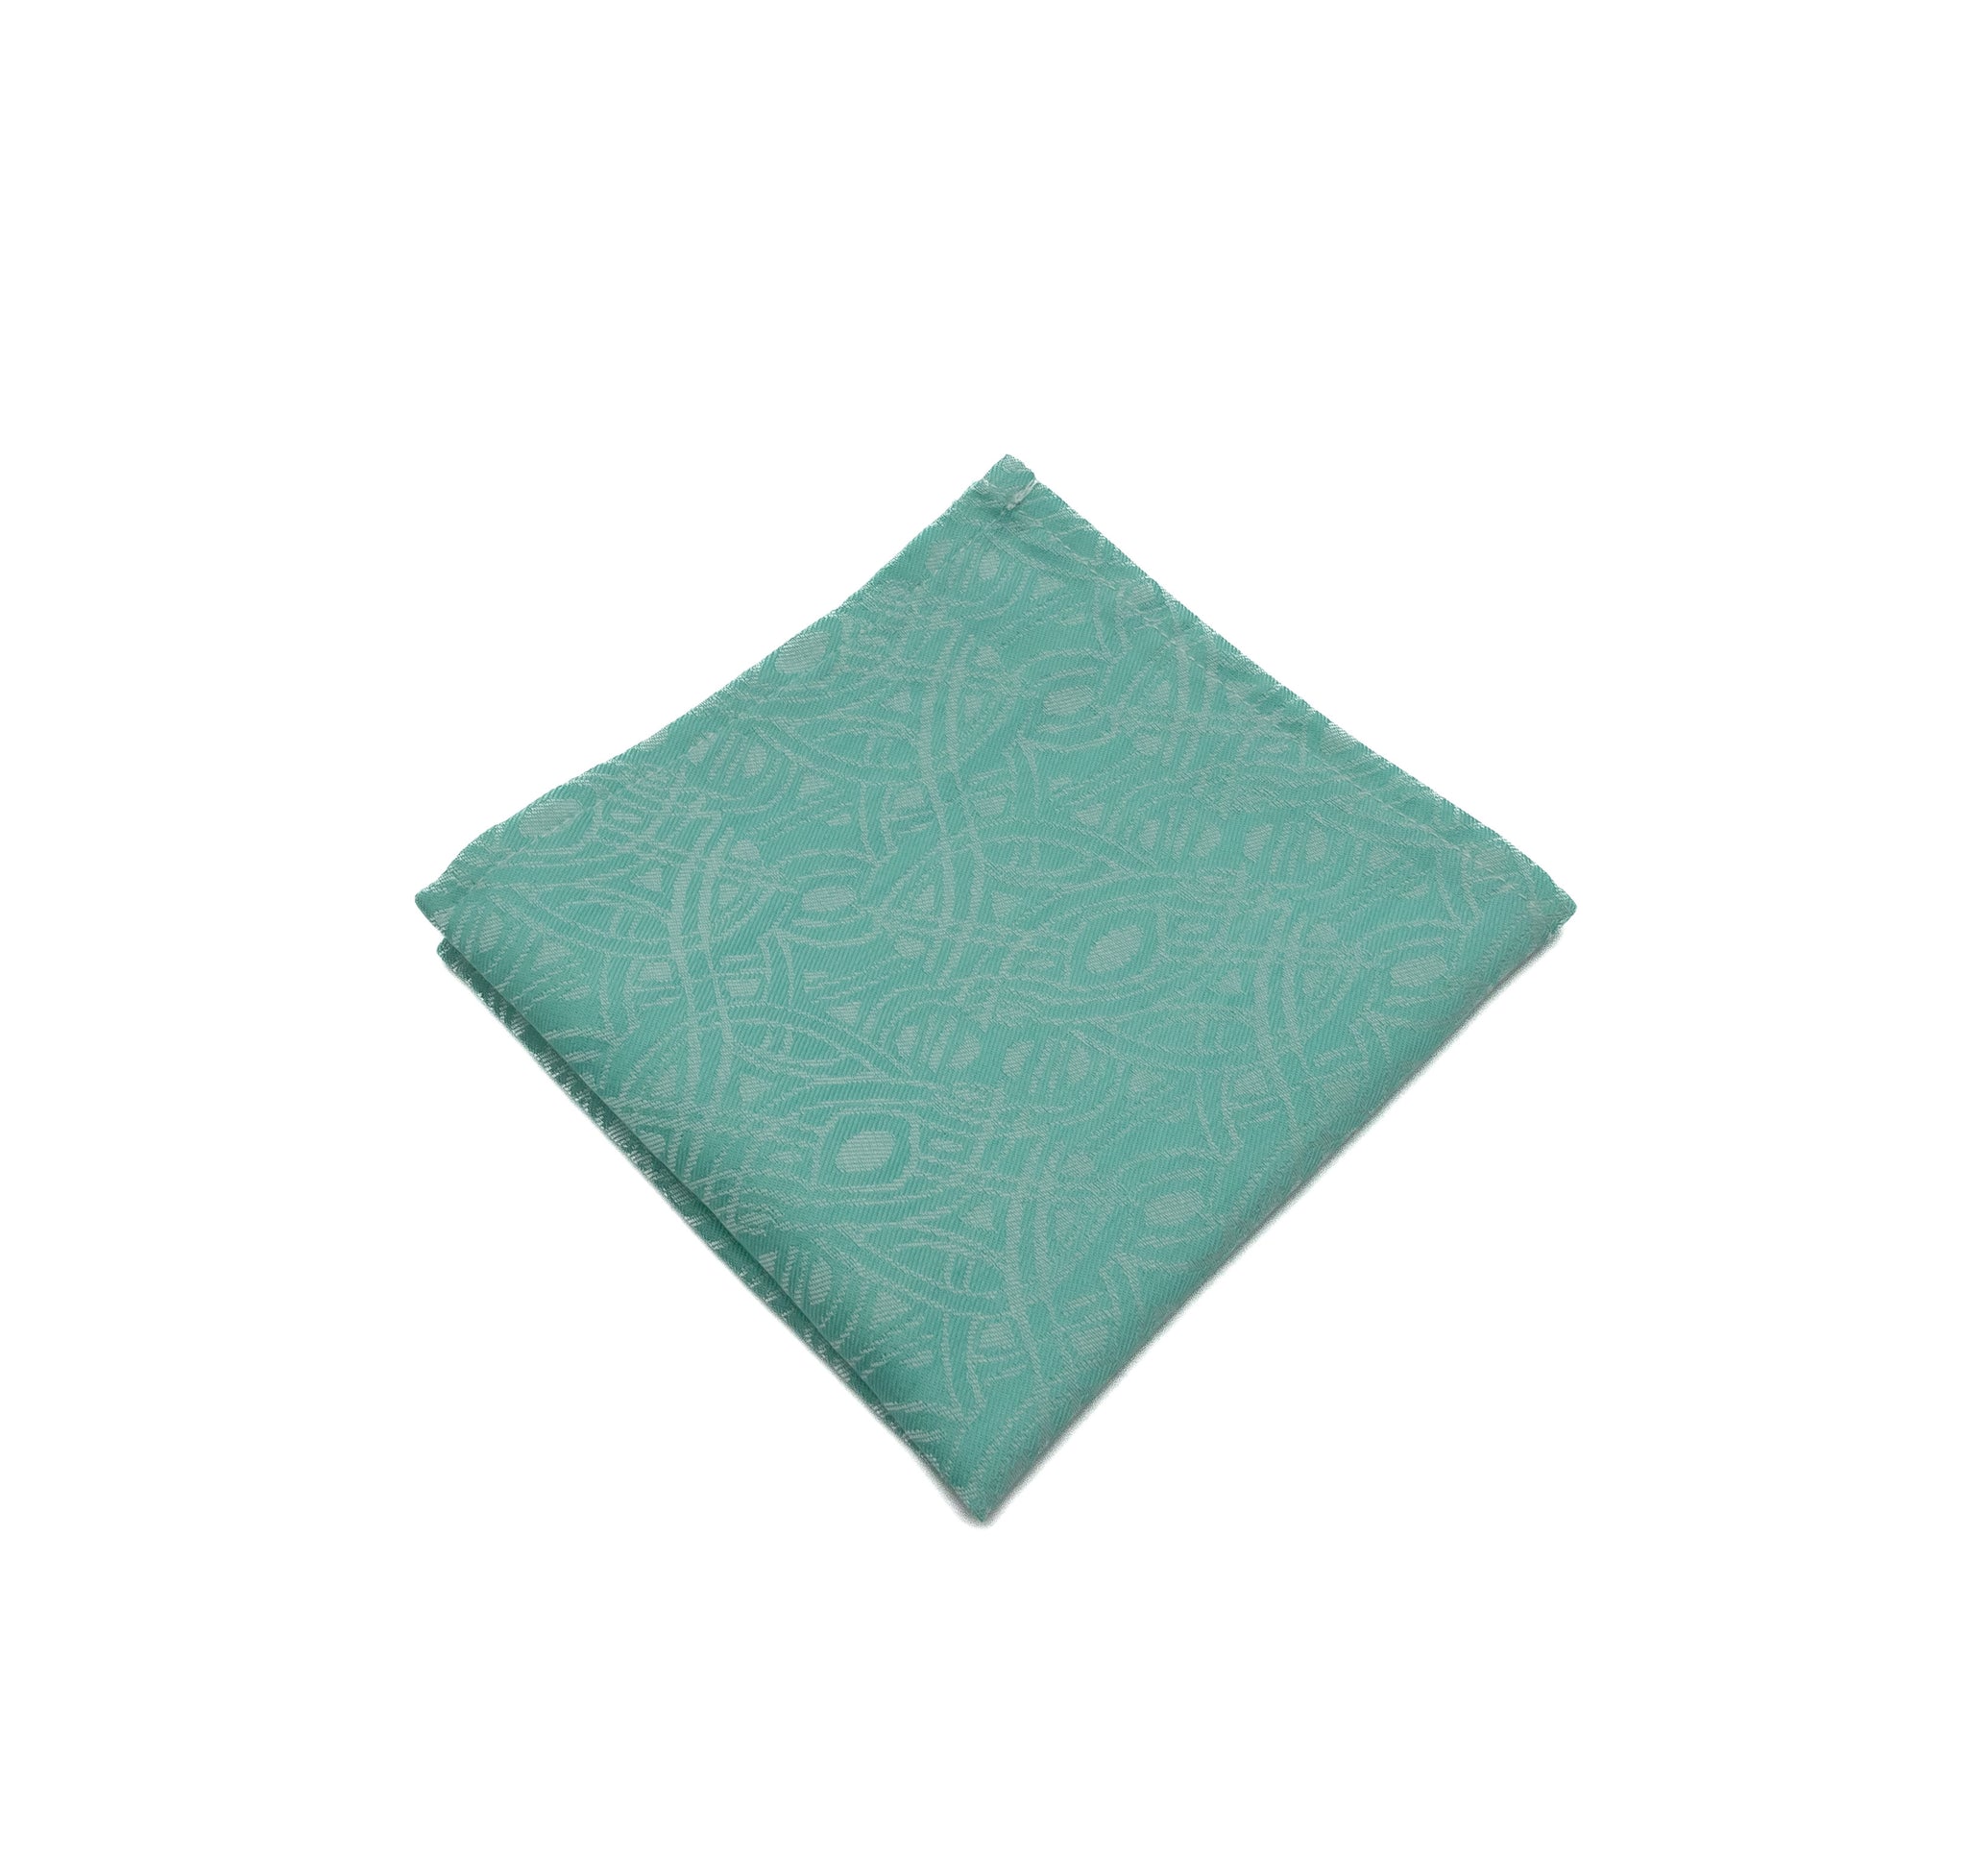 Teal; Overpass pattern pocket square in charcoal